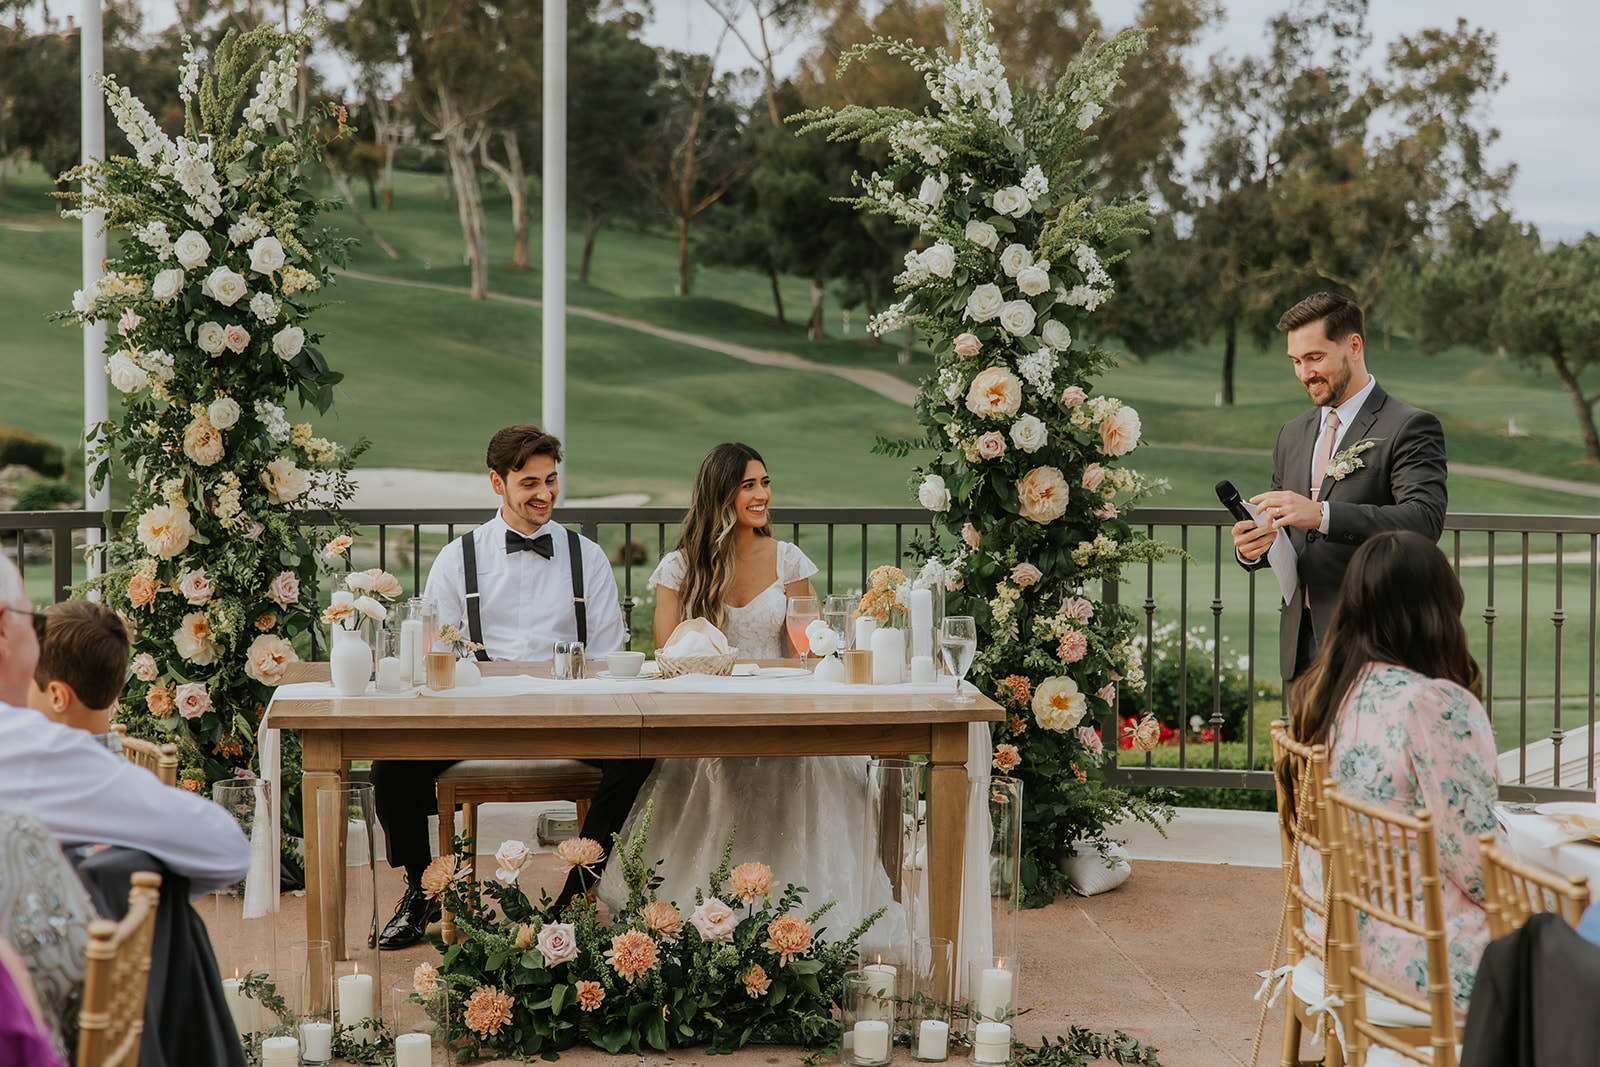 Groom and Bride sitting at the head table with the floral arch behind them